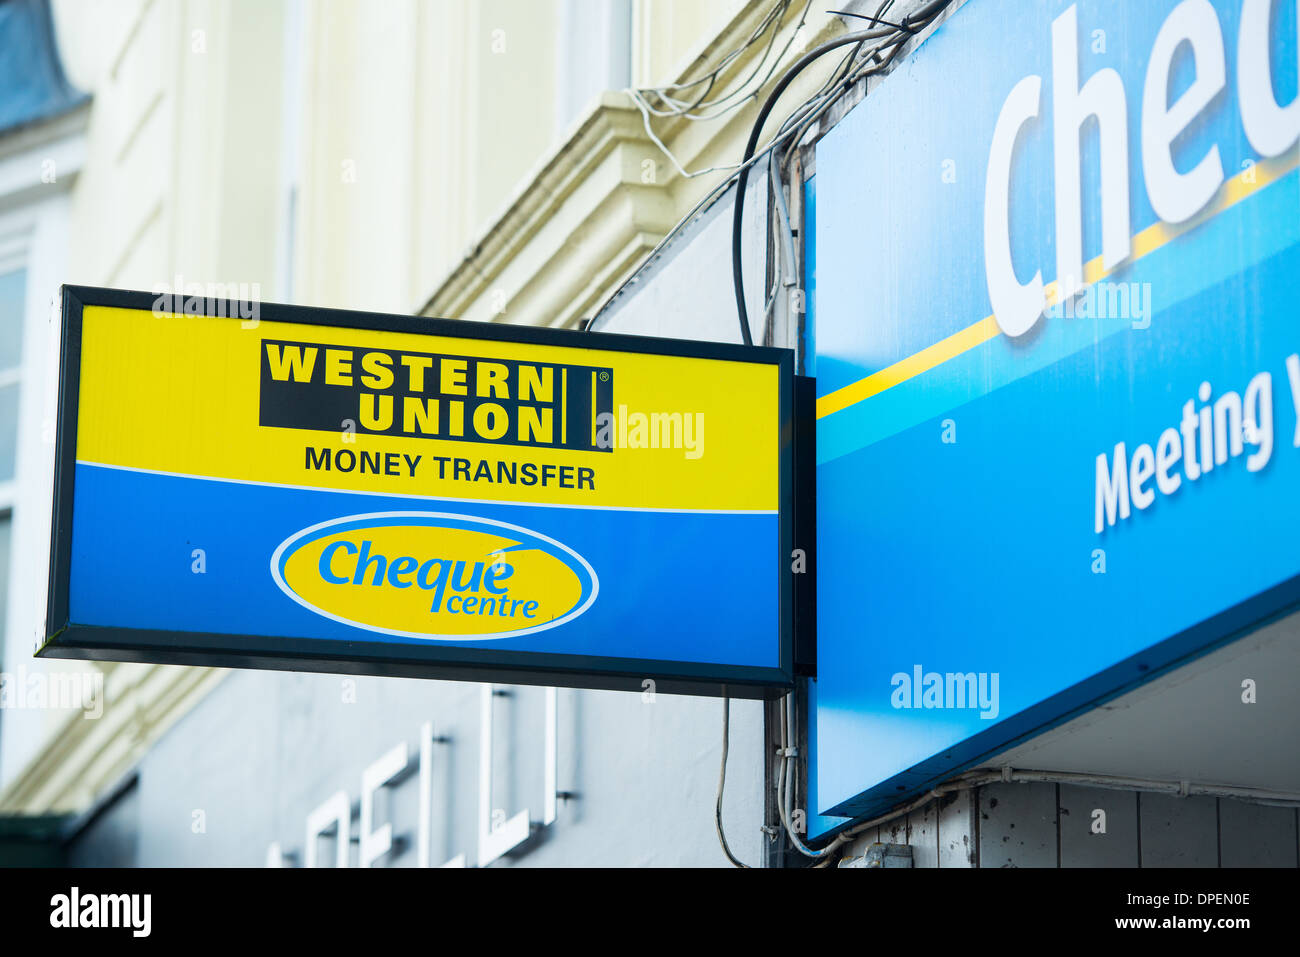 Cheque Centre and Western Union money transfer signage on high street premises in Fareham, Hampshire. Stock Photo